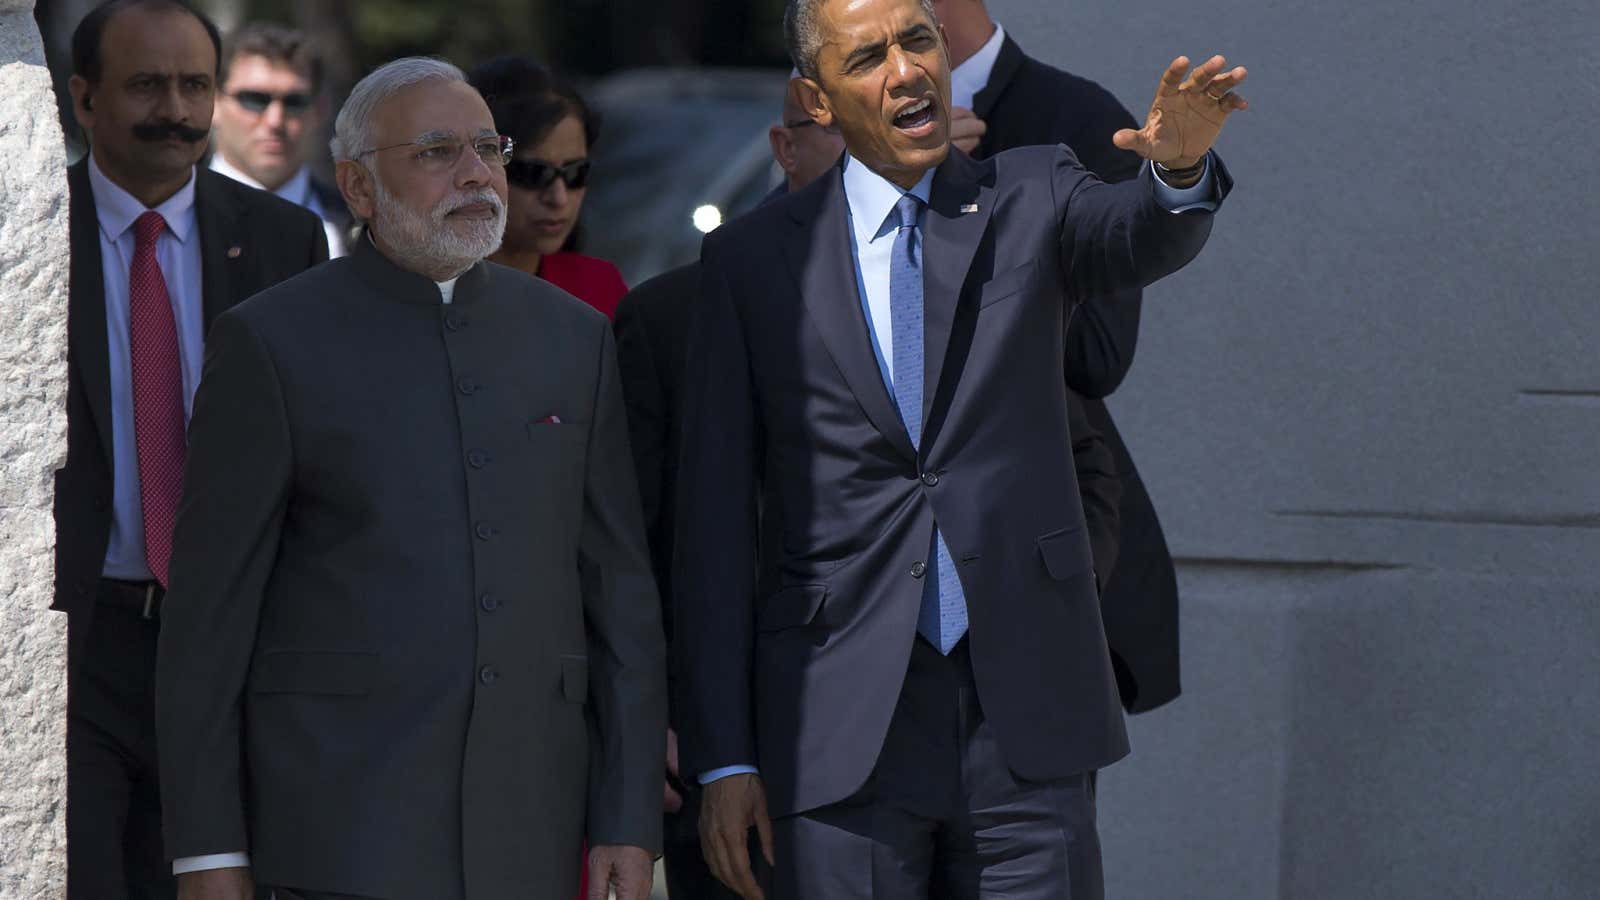 Nearly four months after Modi visited the US, Obama will be India’s guest.